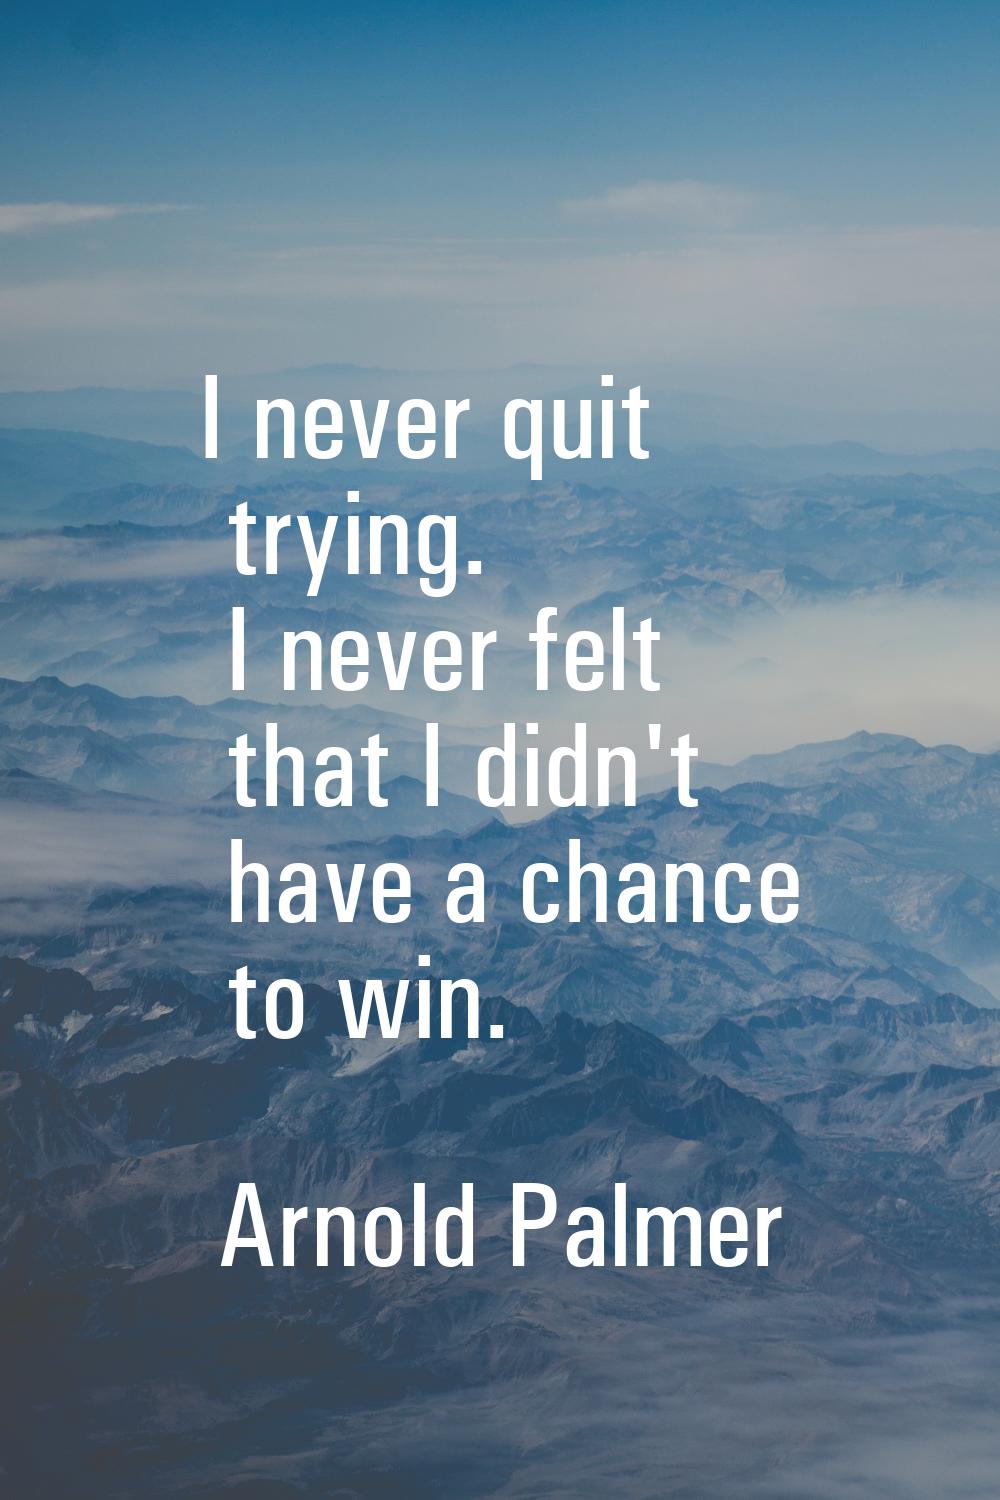 I never quit trying. I never felt that I didn't have a chance to win.